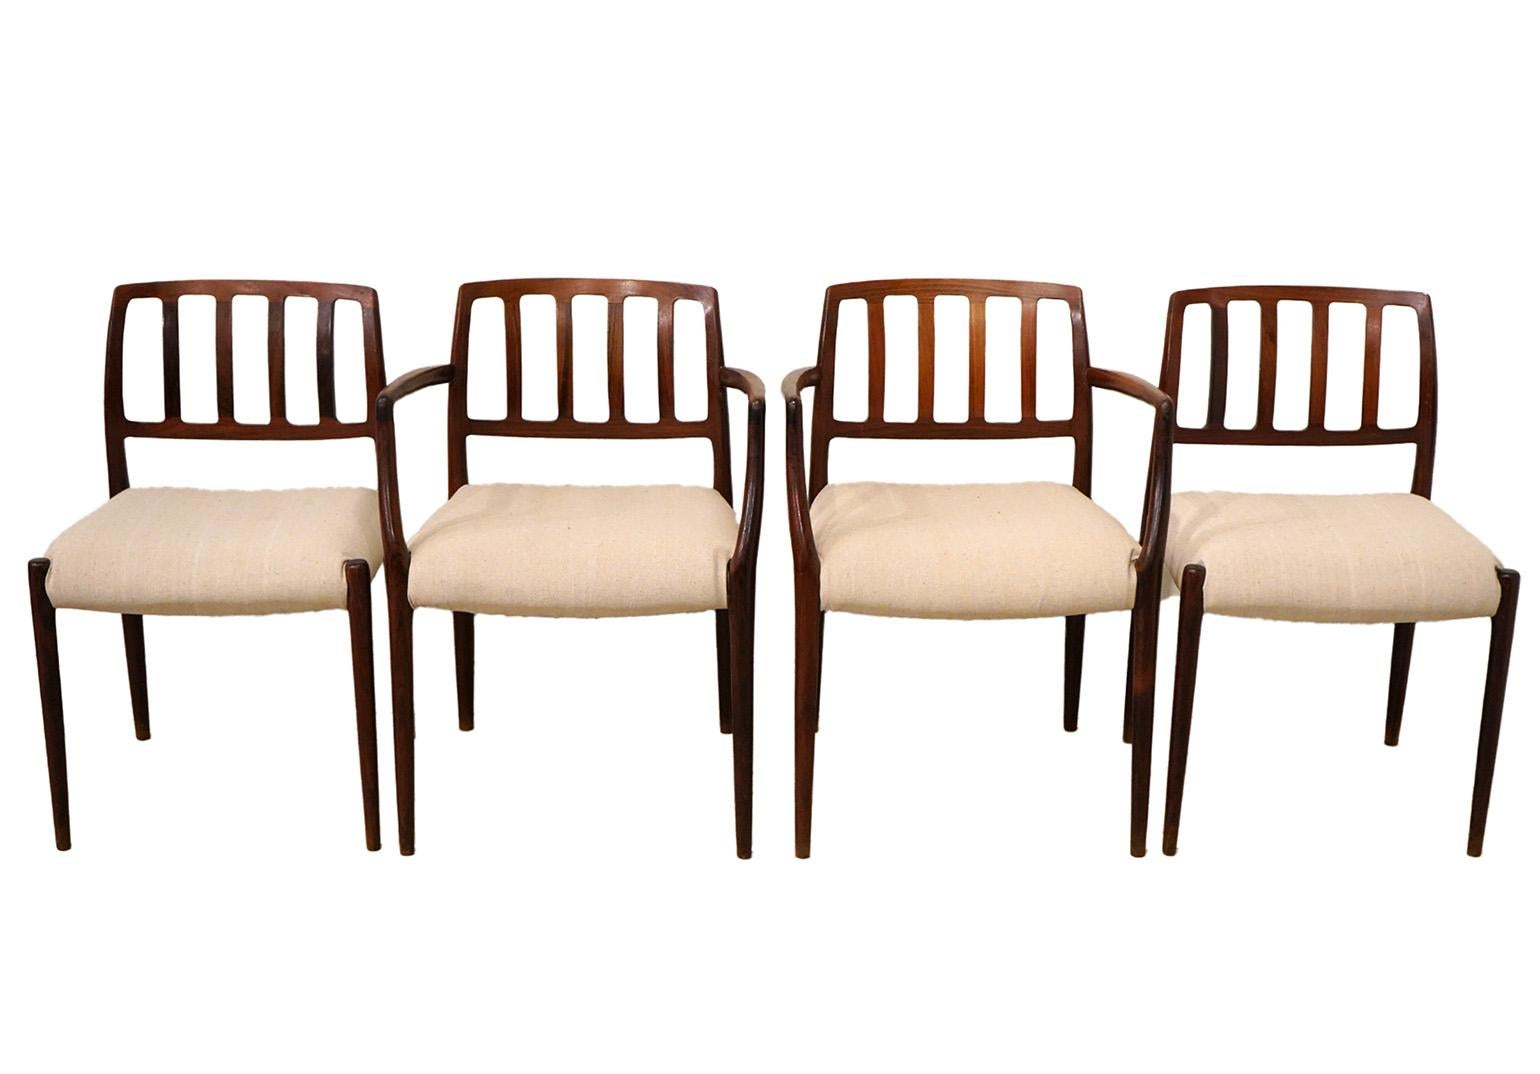 Set of 4 Niels Moller Dining chairs. Set includes 2 arm chairs and 2 side chairs. Newly upholstered and in good condition. 1970's Danish modern.
